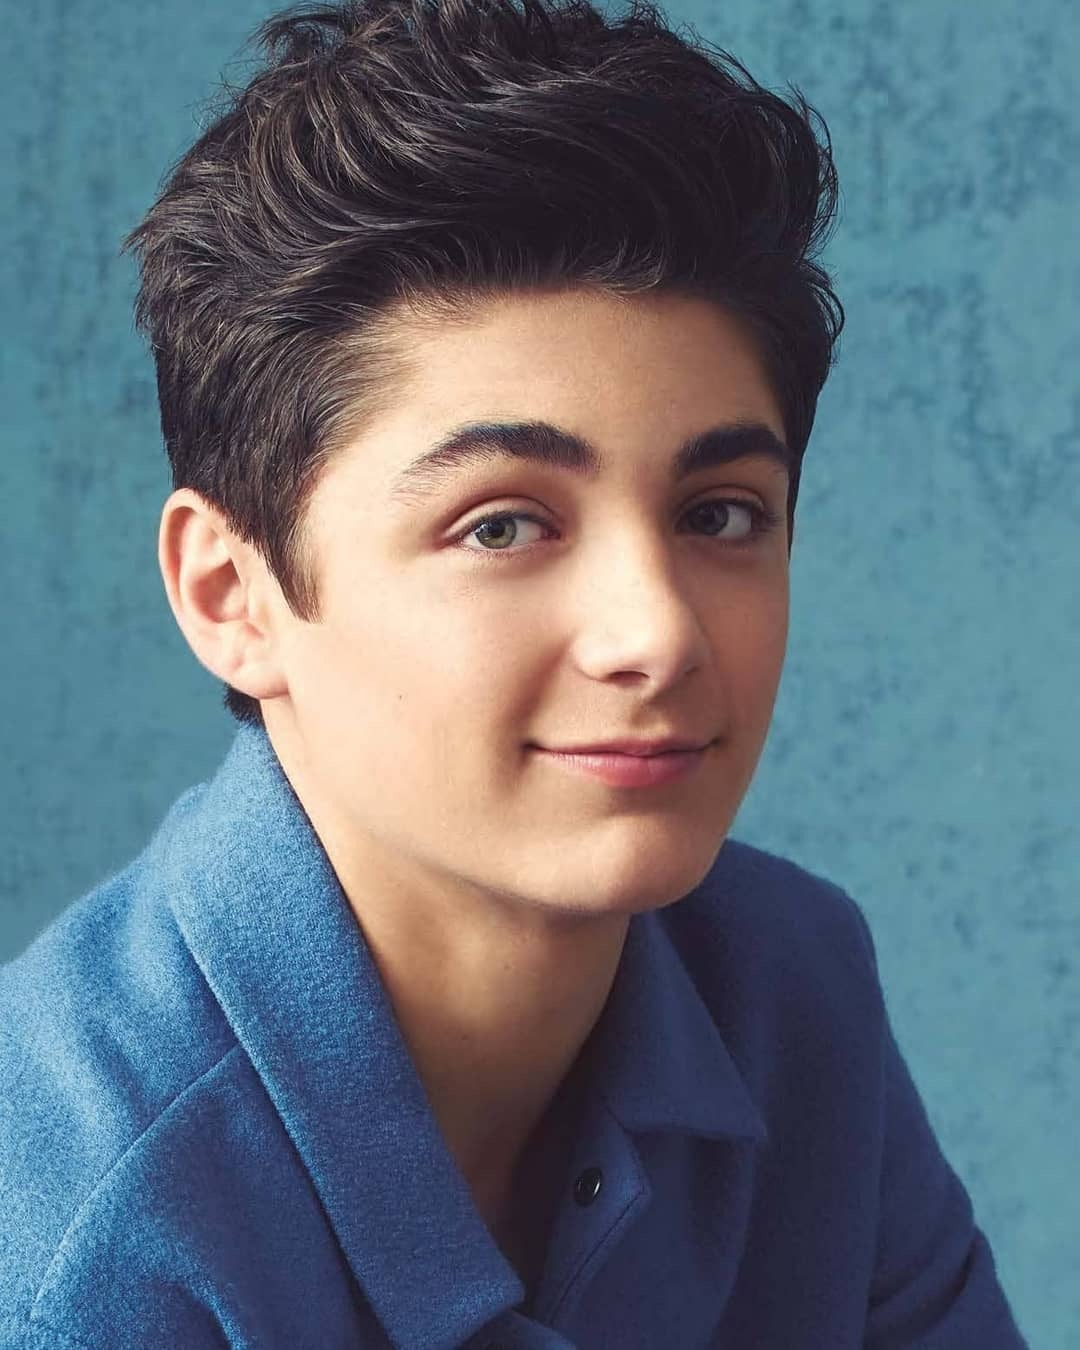 Picture of Asher Angel in General Pictures - asher-angel-1562782175.jpg ...